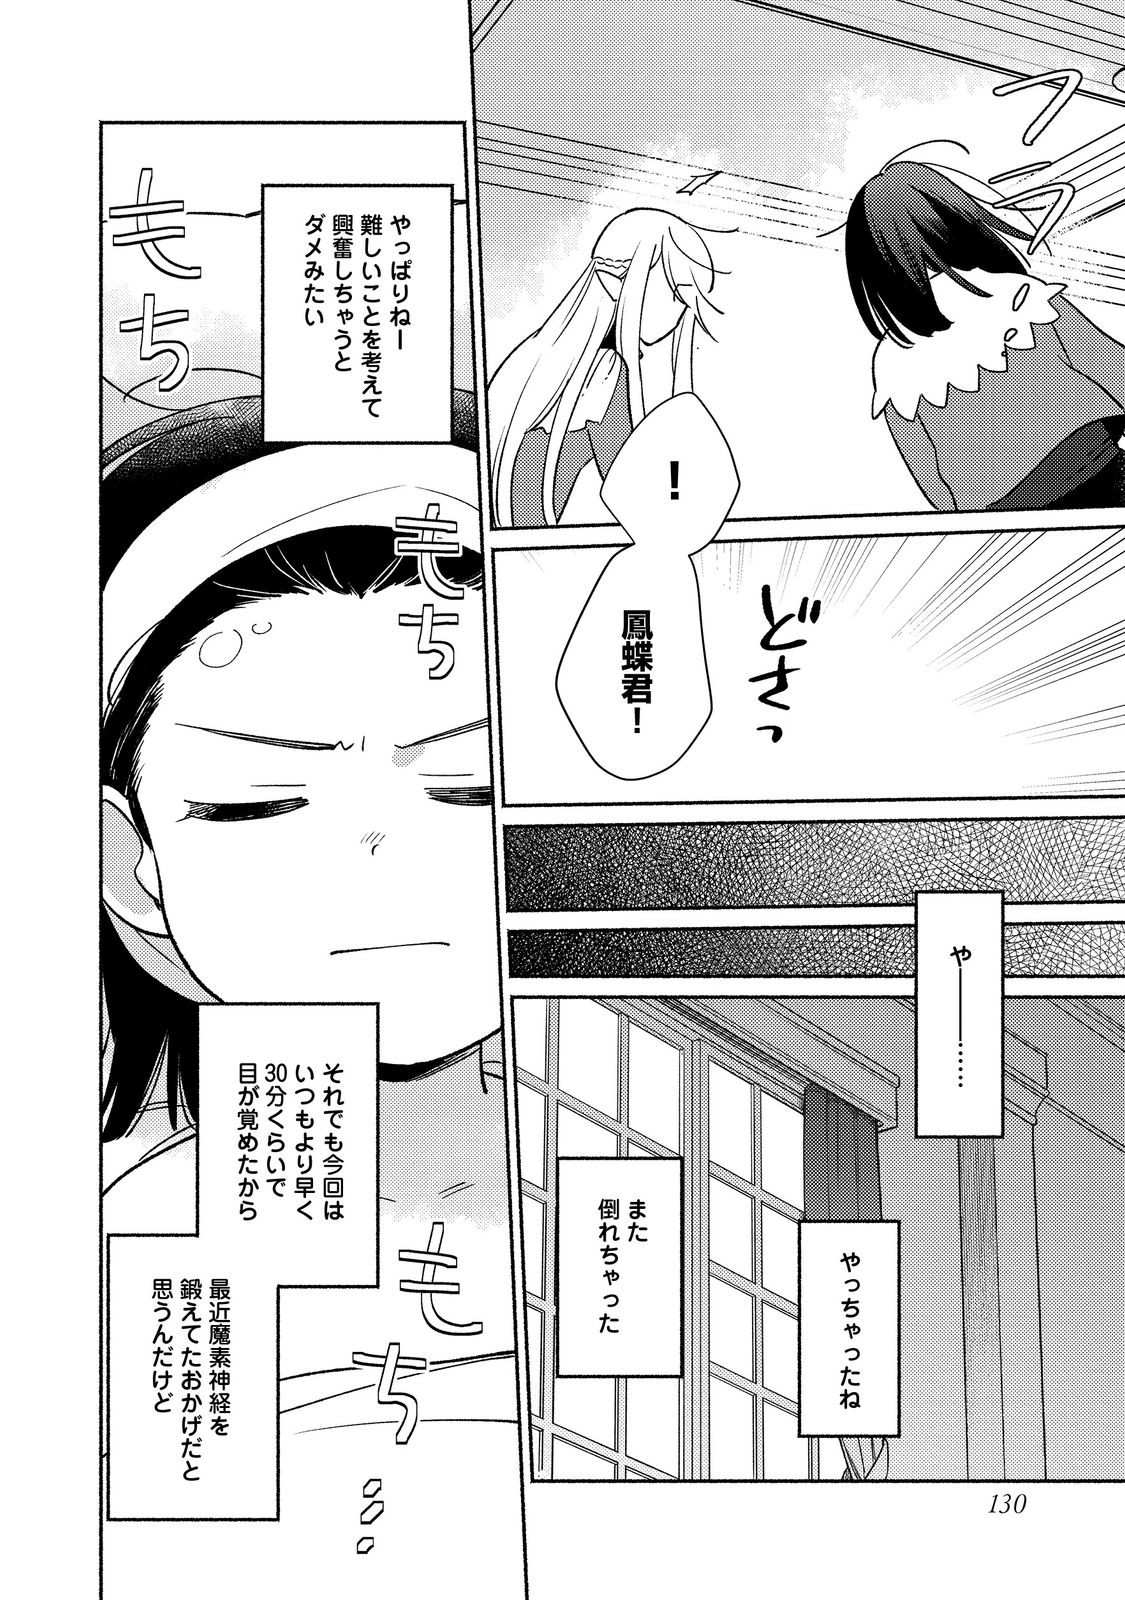 I’m the White Pig Nobleman 第20.1話 - Page 4